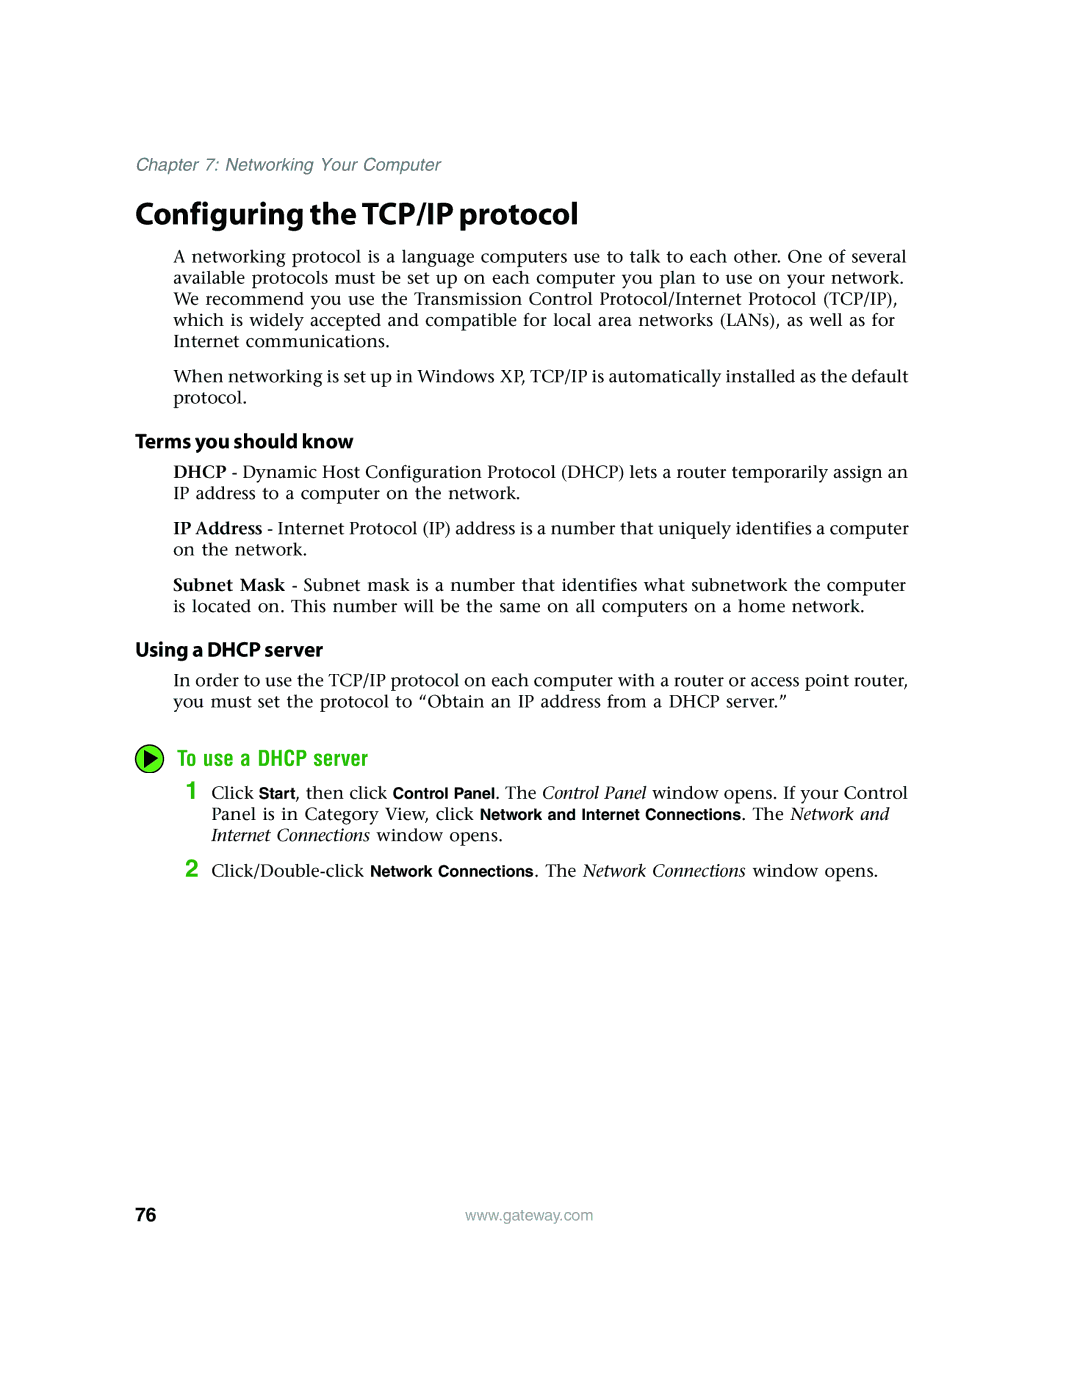 Gateway E4350 manual Configuring the TCP/IP protocol, To use a Dhcp server 